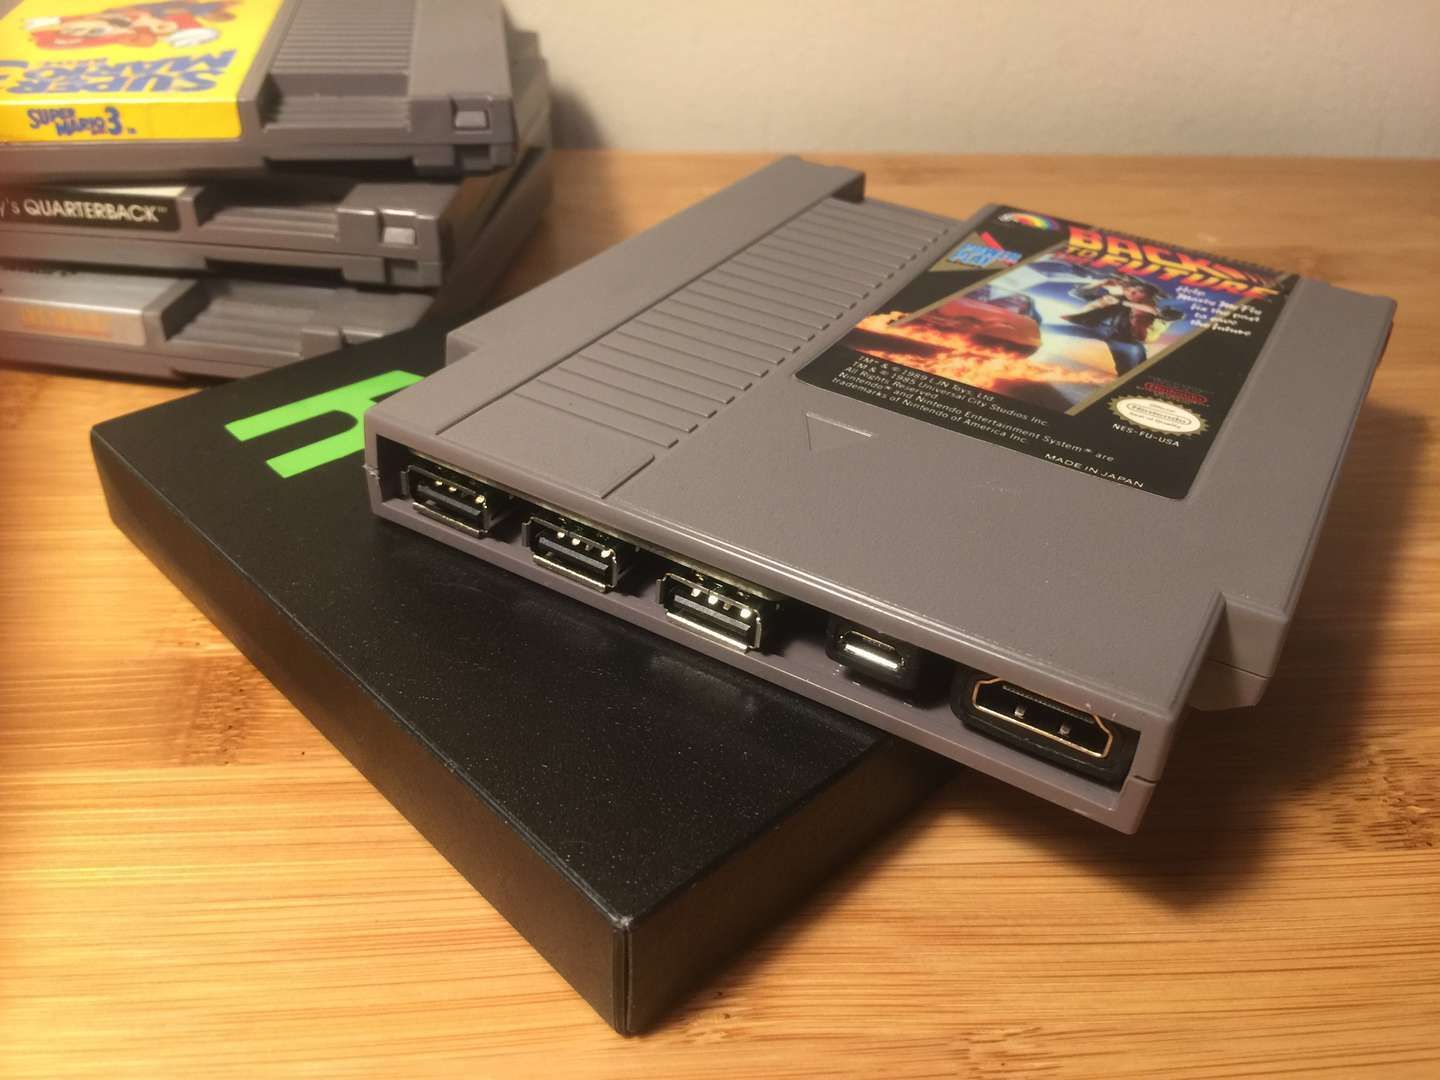 12 epic retro games console mods and hacks to try today